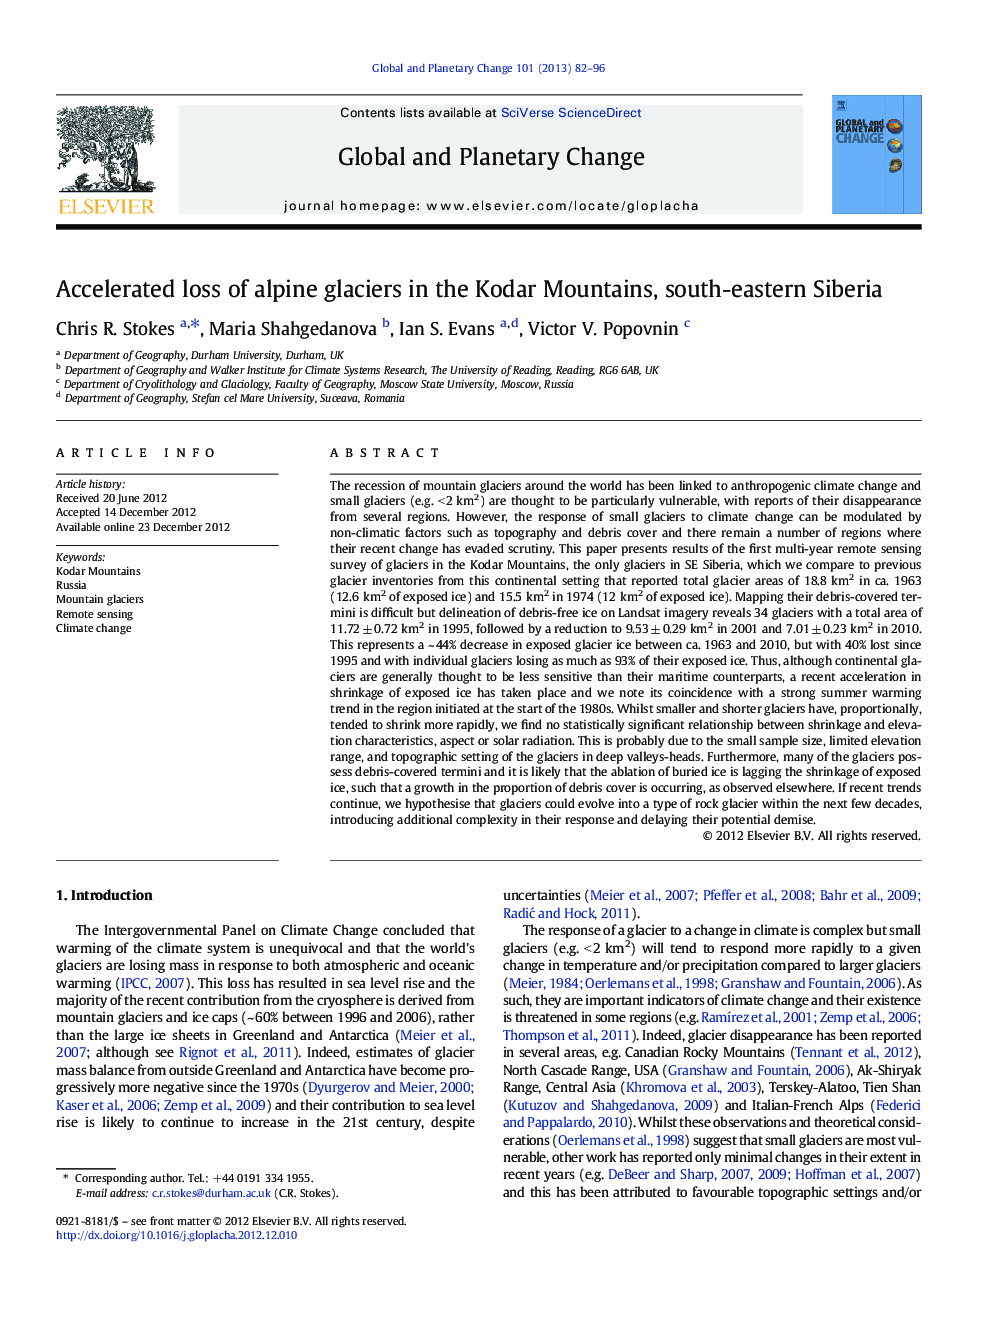 Accelerated loss of alpine glaciers in the Kodar Mountains, south-eastern Siberia